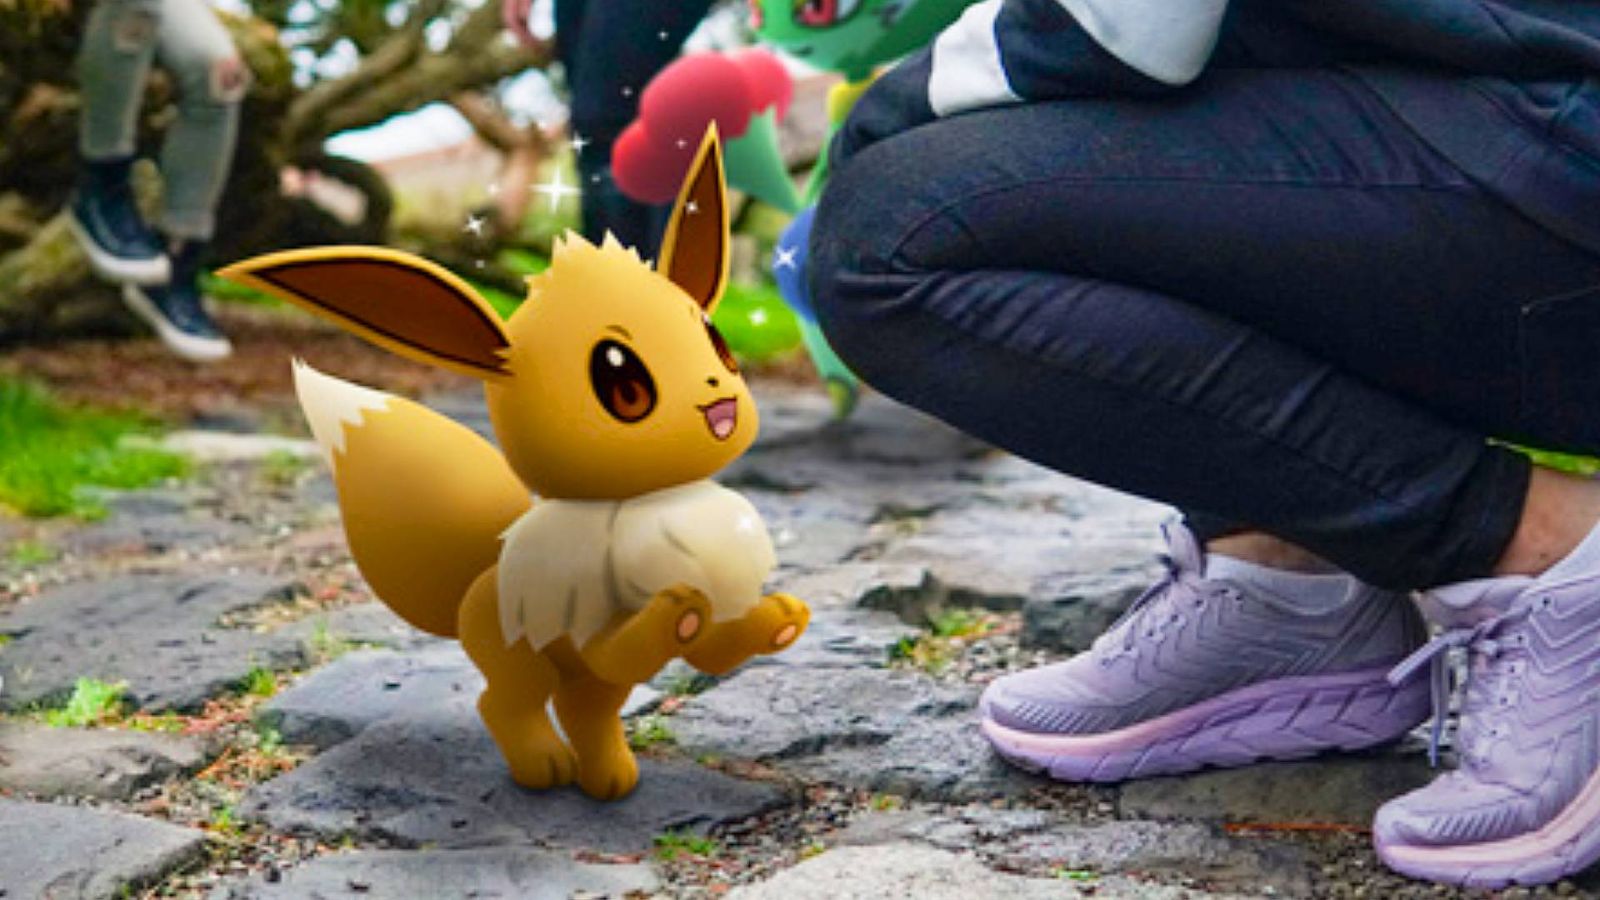 An Eevee and its trainer